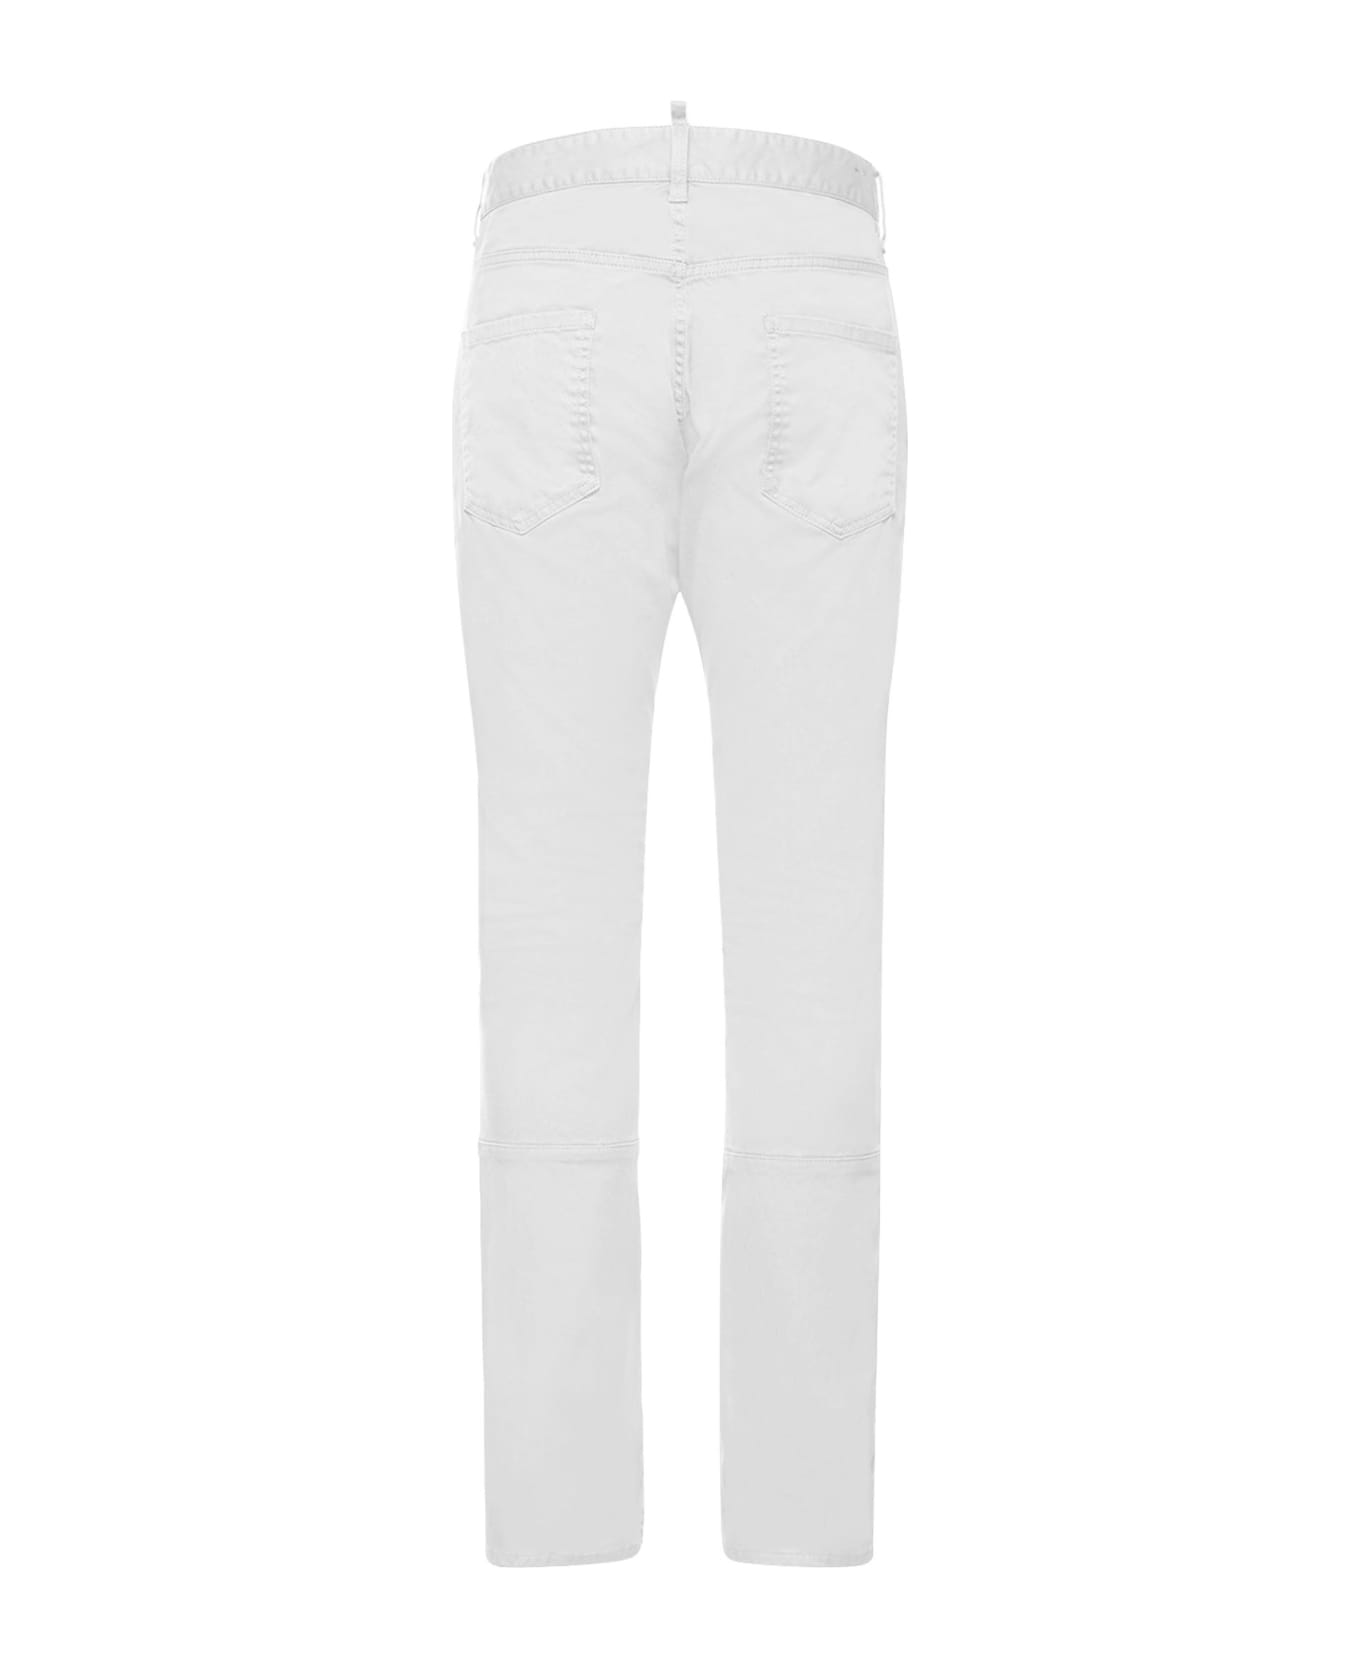 Dsquared2 Cool Guy Jeans - Bianco ボトムス